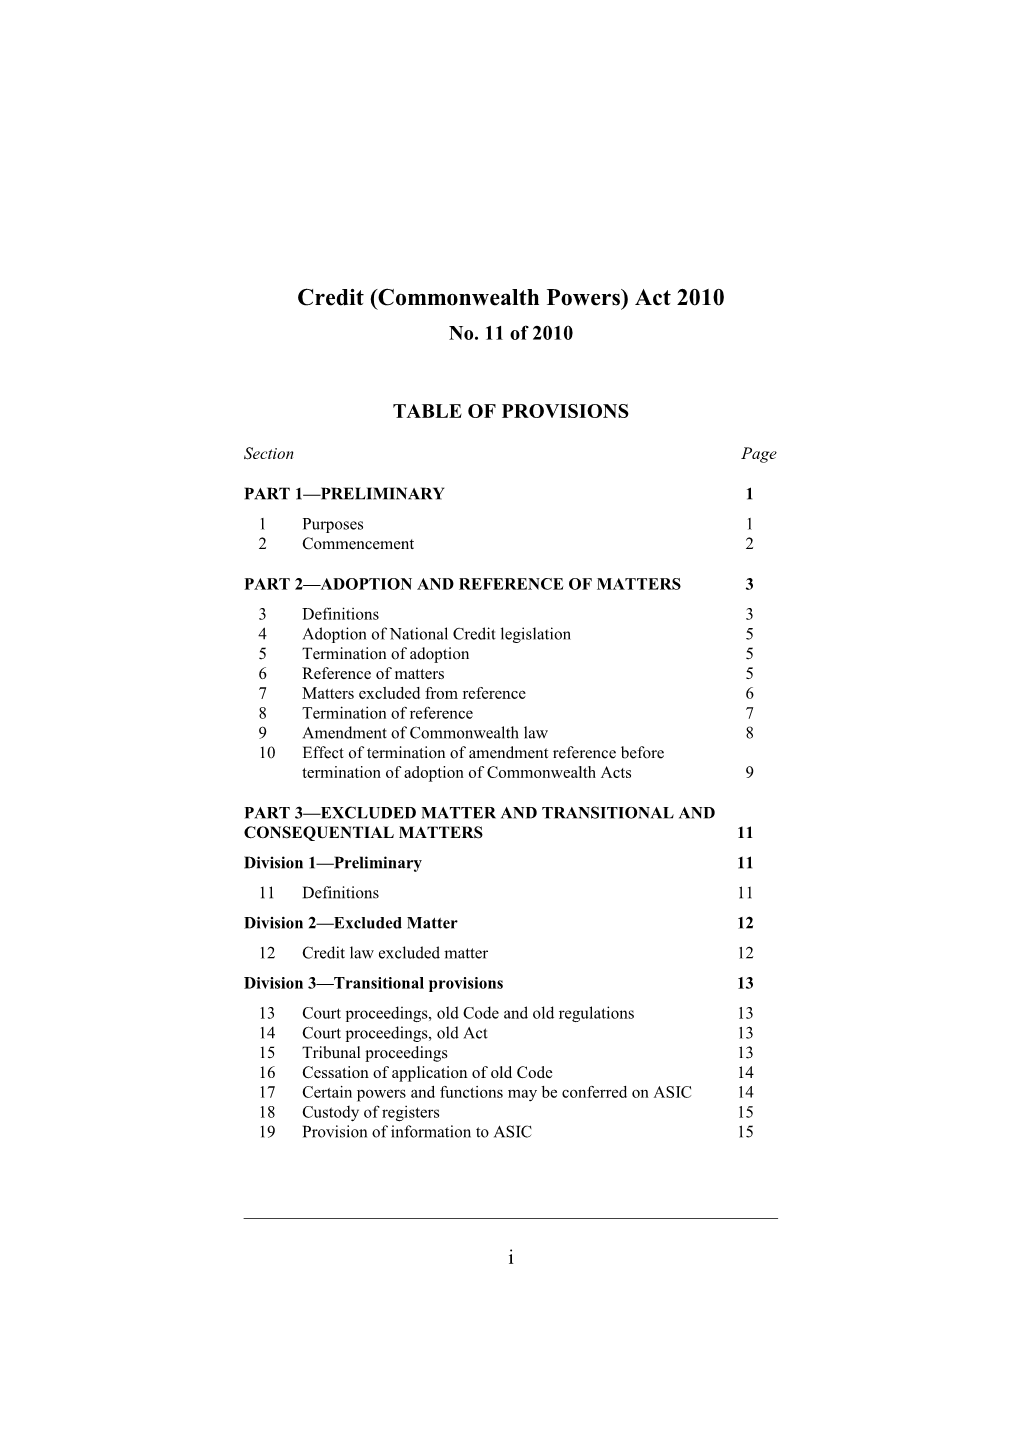 Credit (Commonwealth Powers) Act 2010